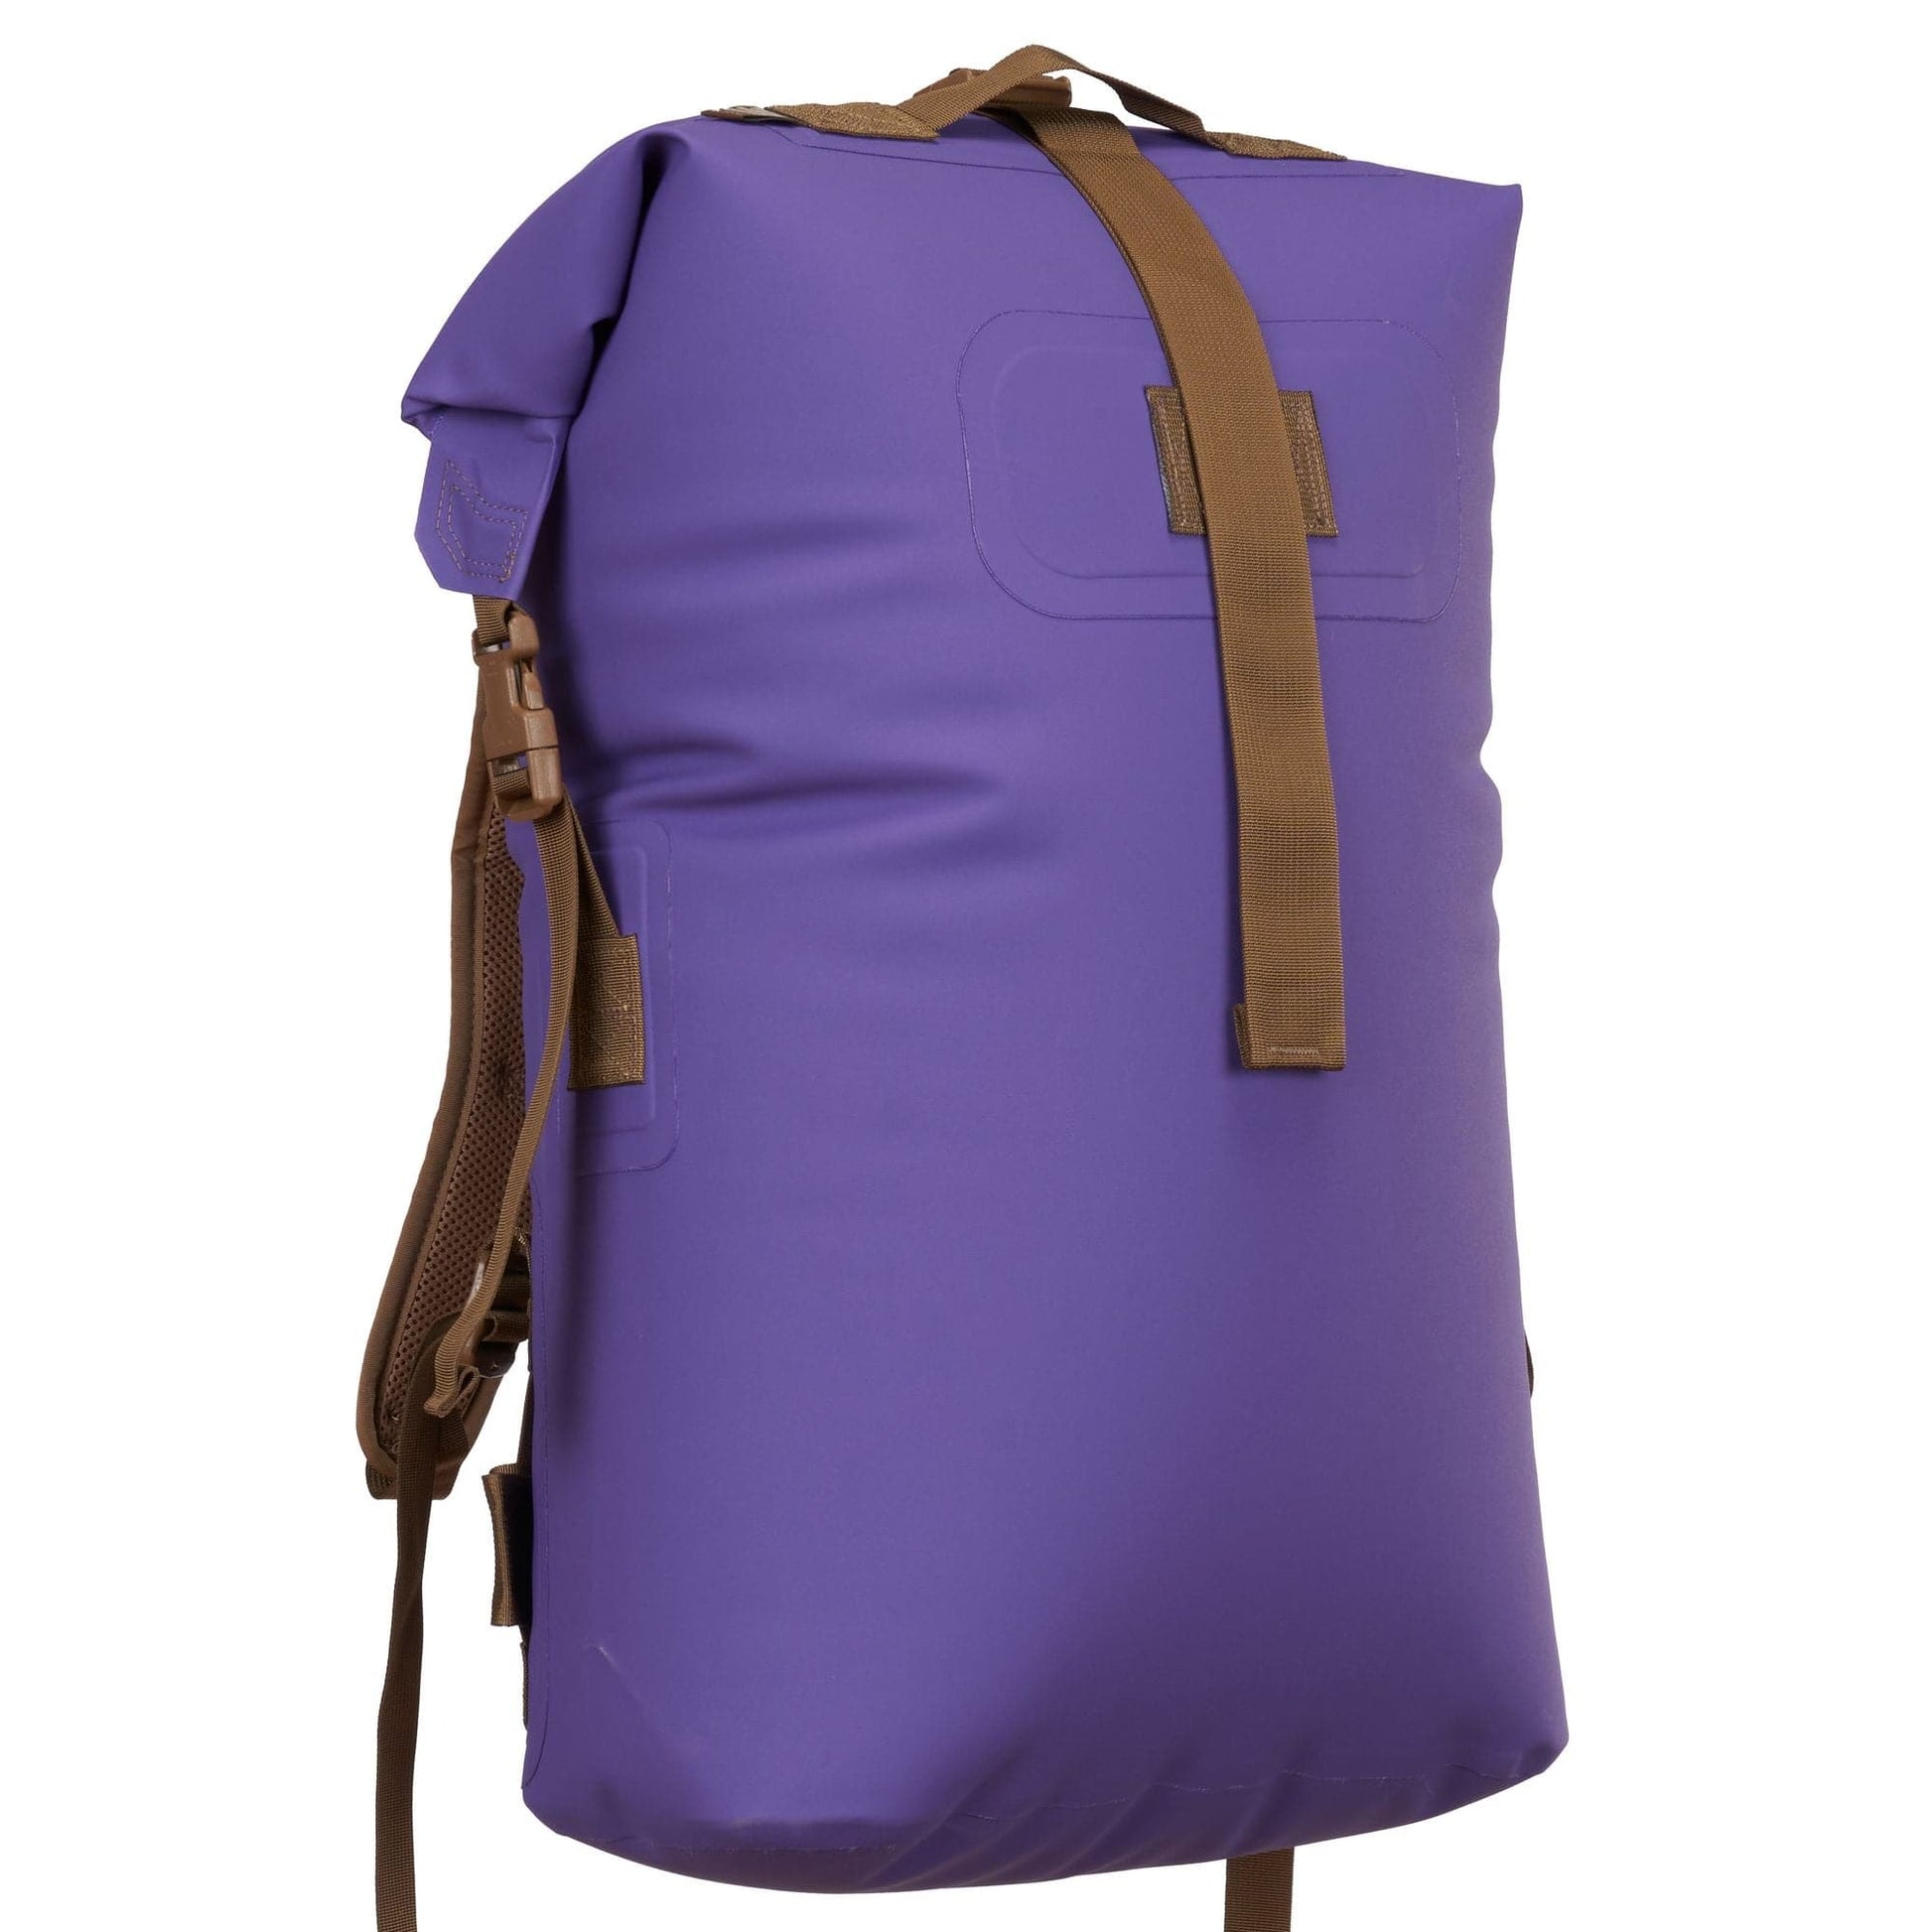 Featuring the Animas Drypack dry bag manufactured by Watershed shown here from a fourth angle.